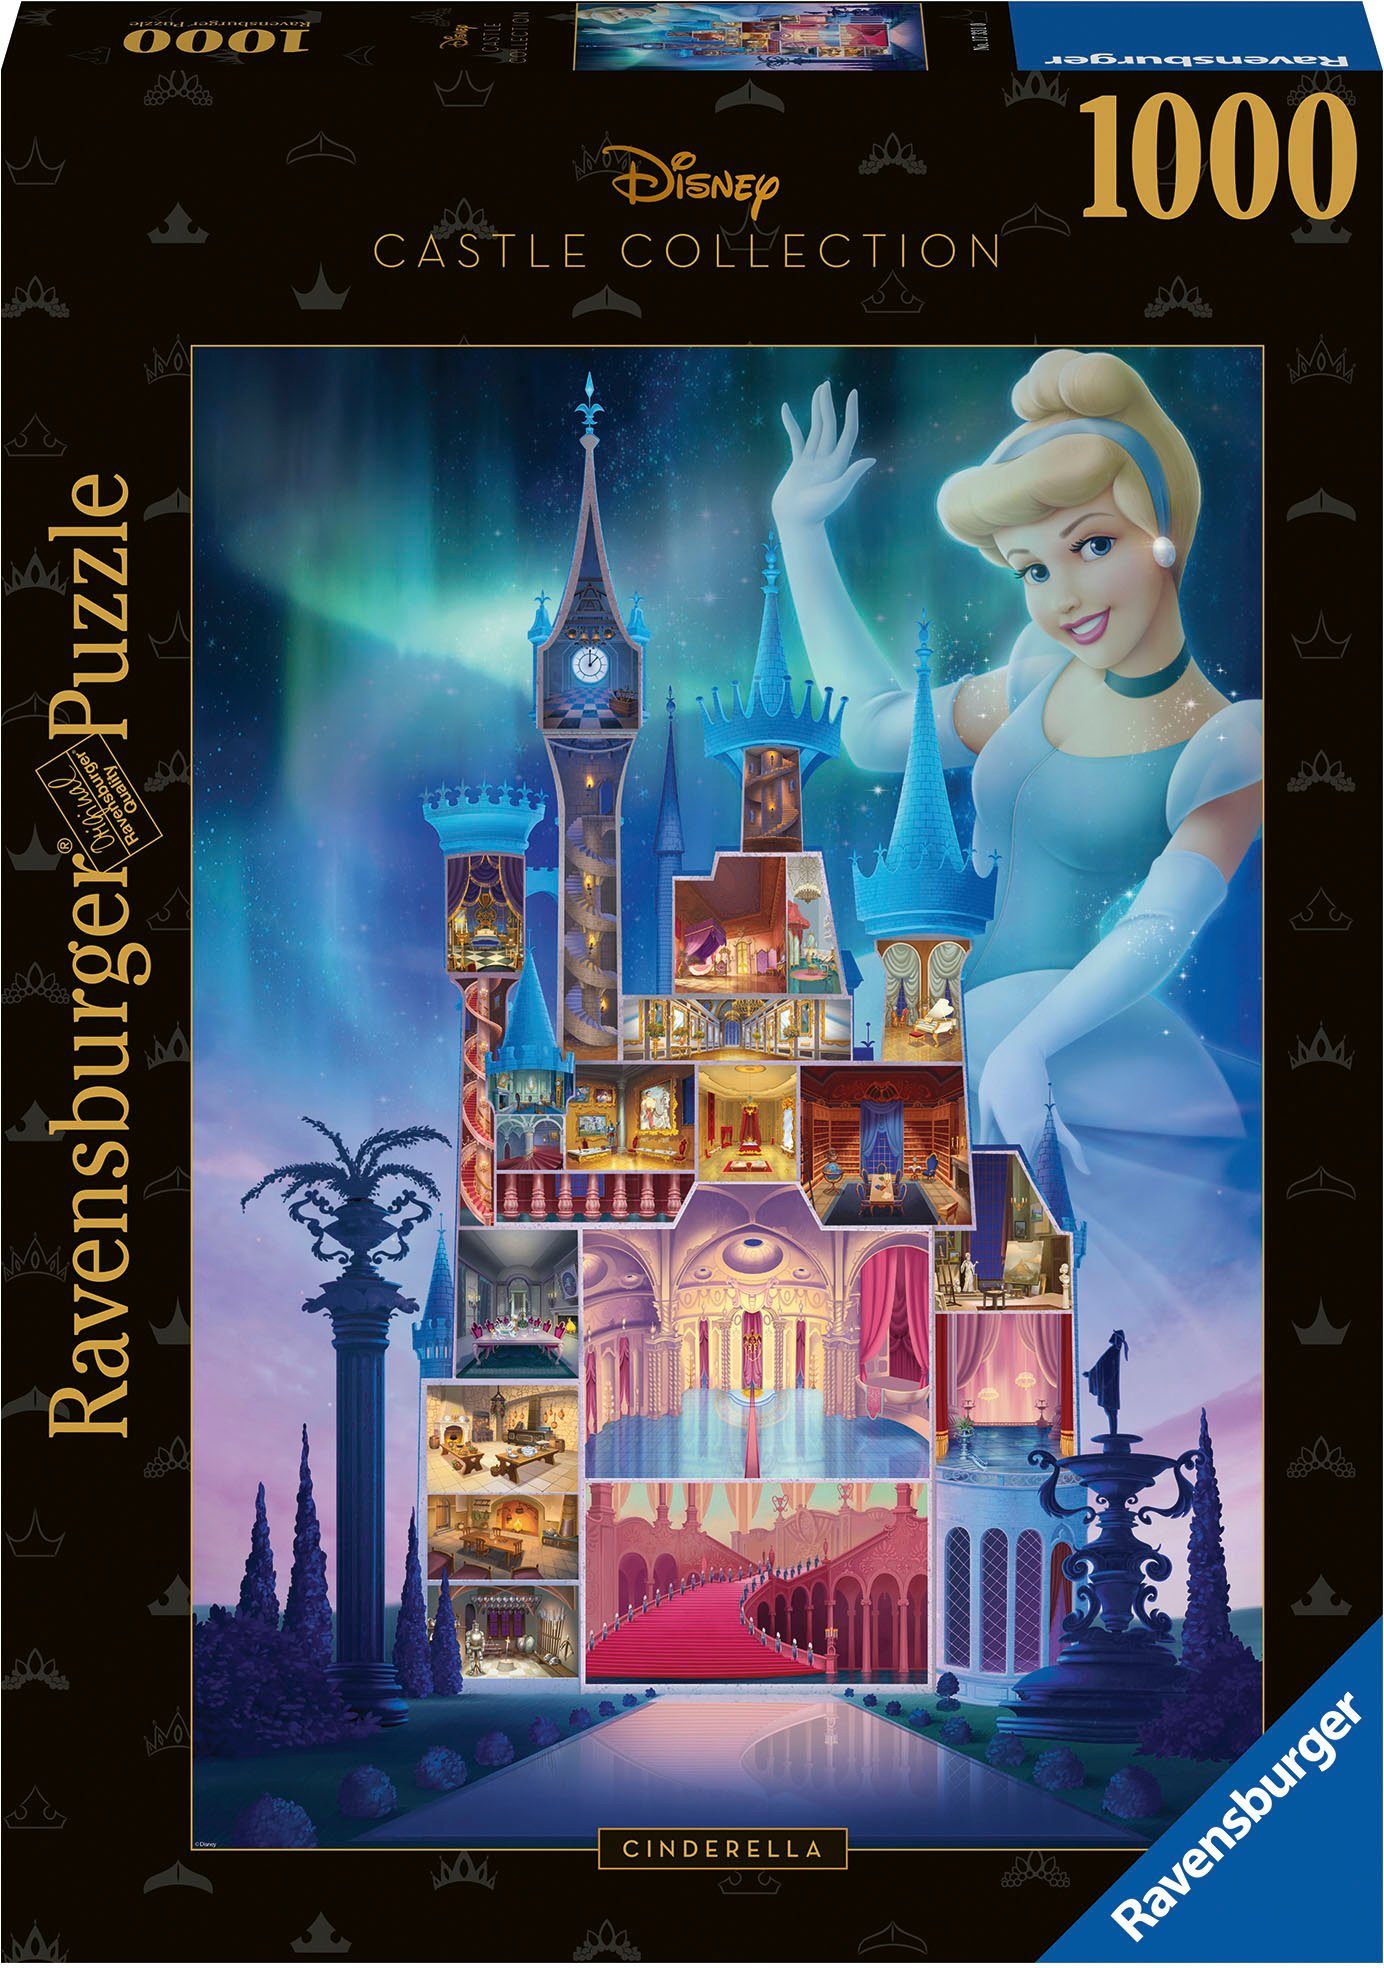 1000 Castle Puzzleteile, Disney Germany Ravensburger Made Cinderella, Collection, Puzzle in